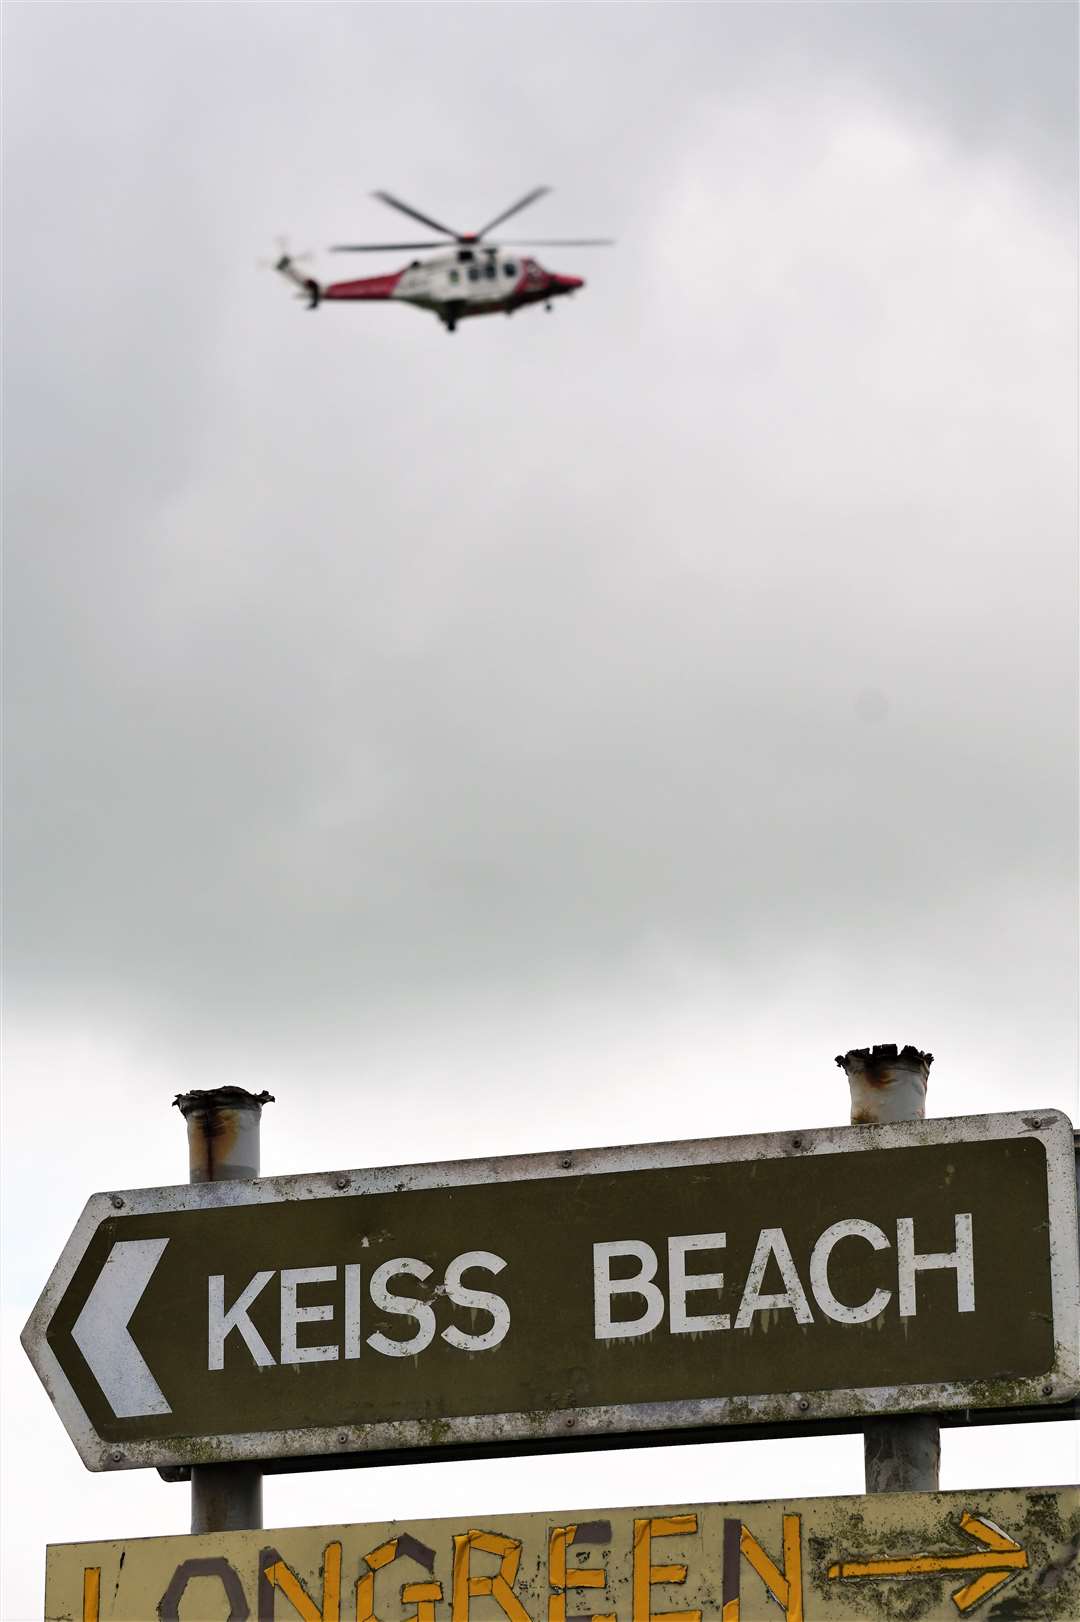 The coastguard helicopter was observed circling around the Keiss area and coastline on Sunday afternoon. Picture: DGS